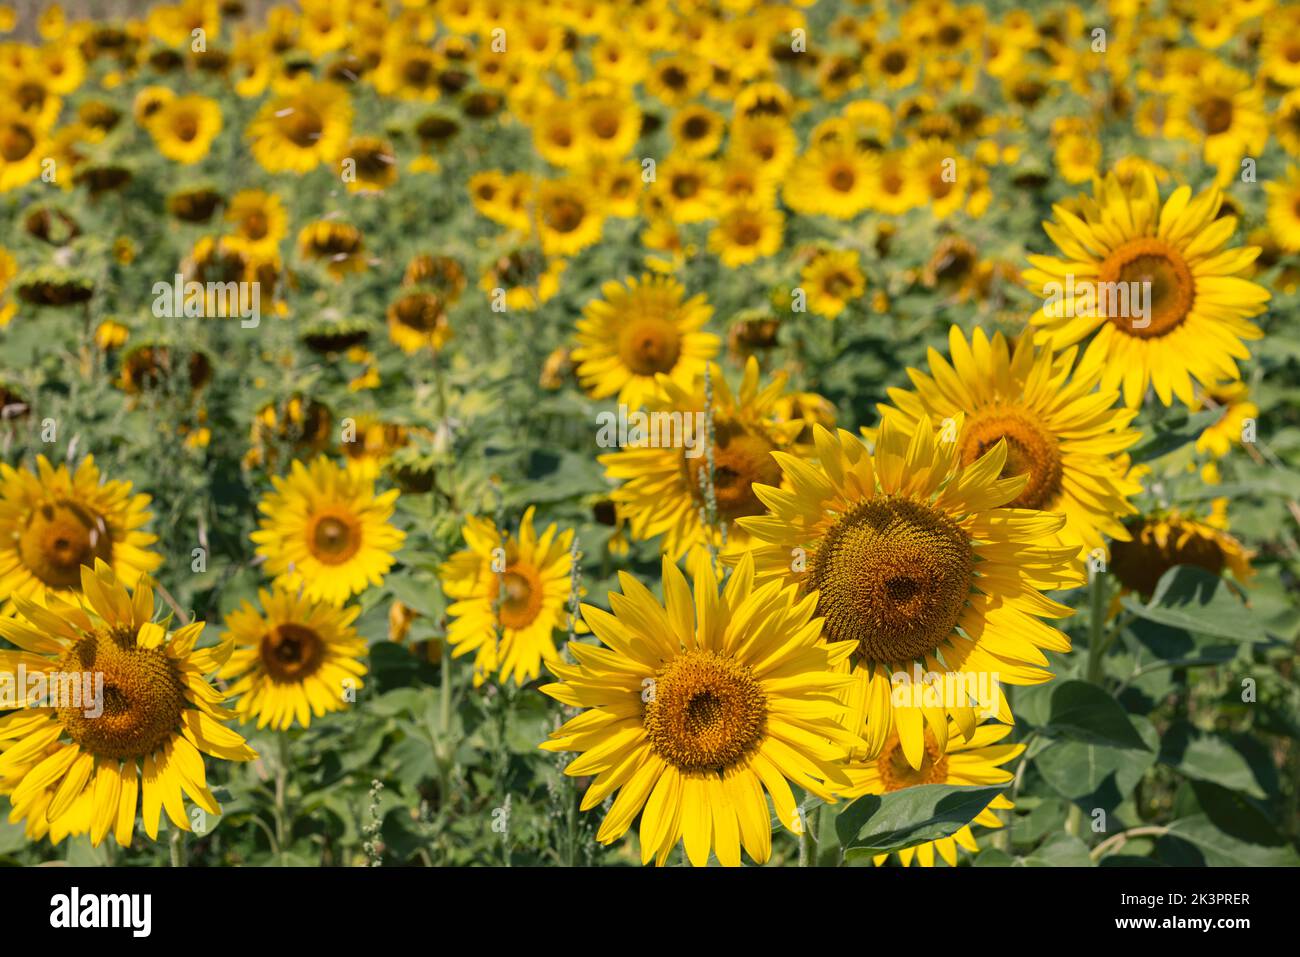 Full field of bright yellow sunflowers (Helianthus annuus) inflorescences at different stages of ripening Stock Photo